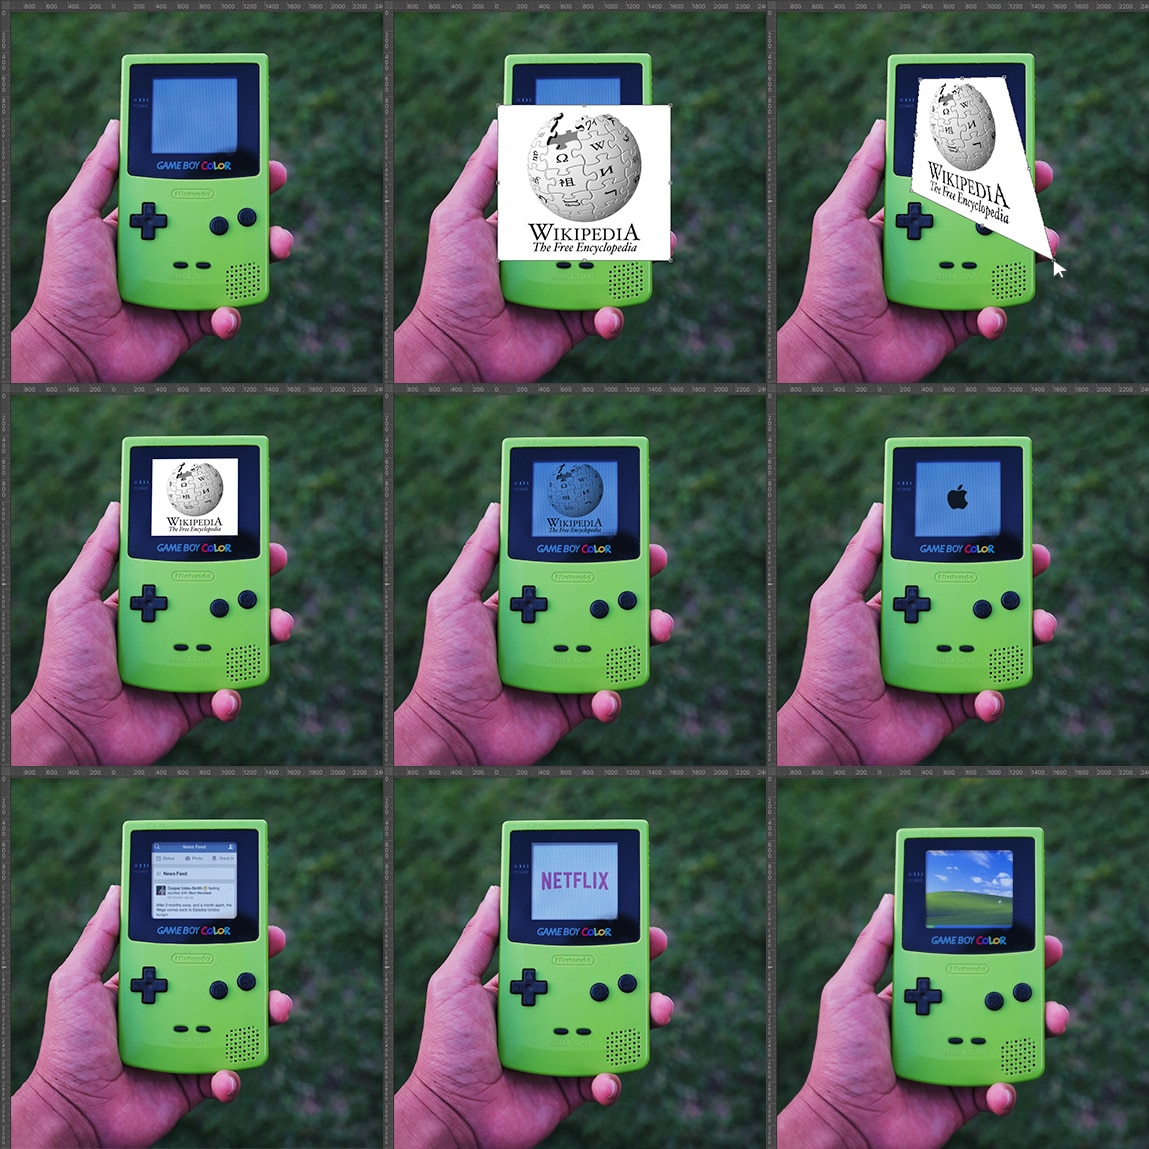 Images of a Gameboy handheld console with different images superimposed on the screen including Wikipedia, Netflix and the Windows XP desktop